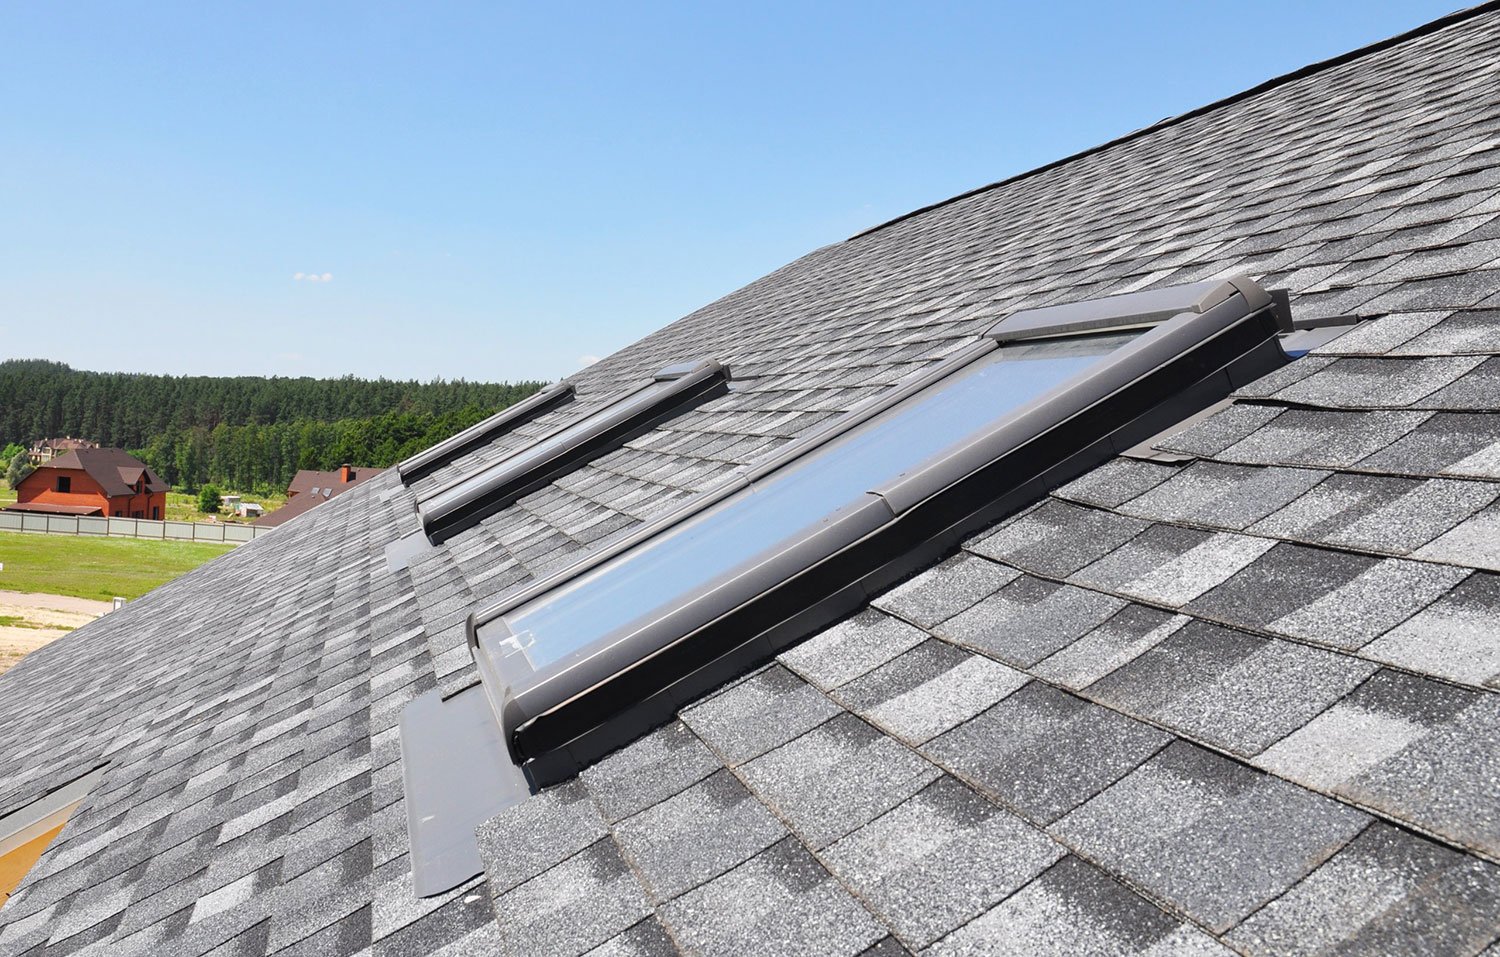 having more skylights can bring in more natural sunlight to your home